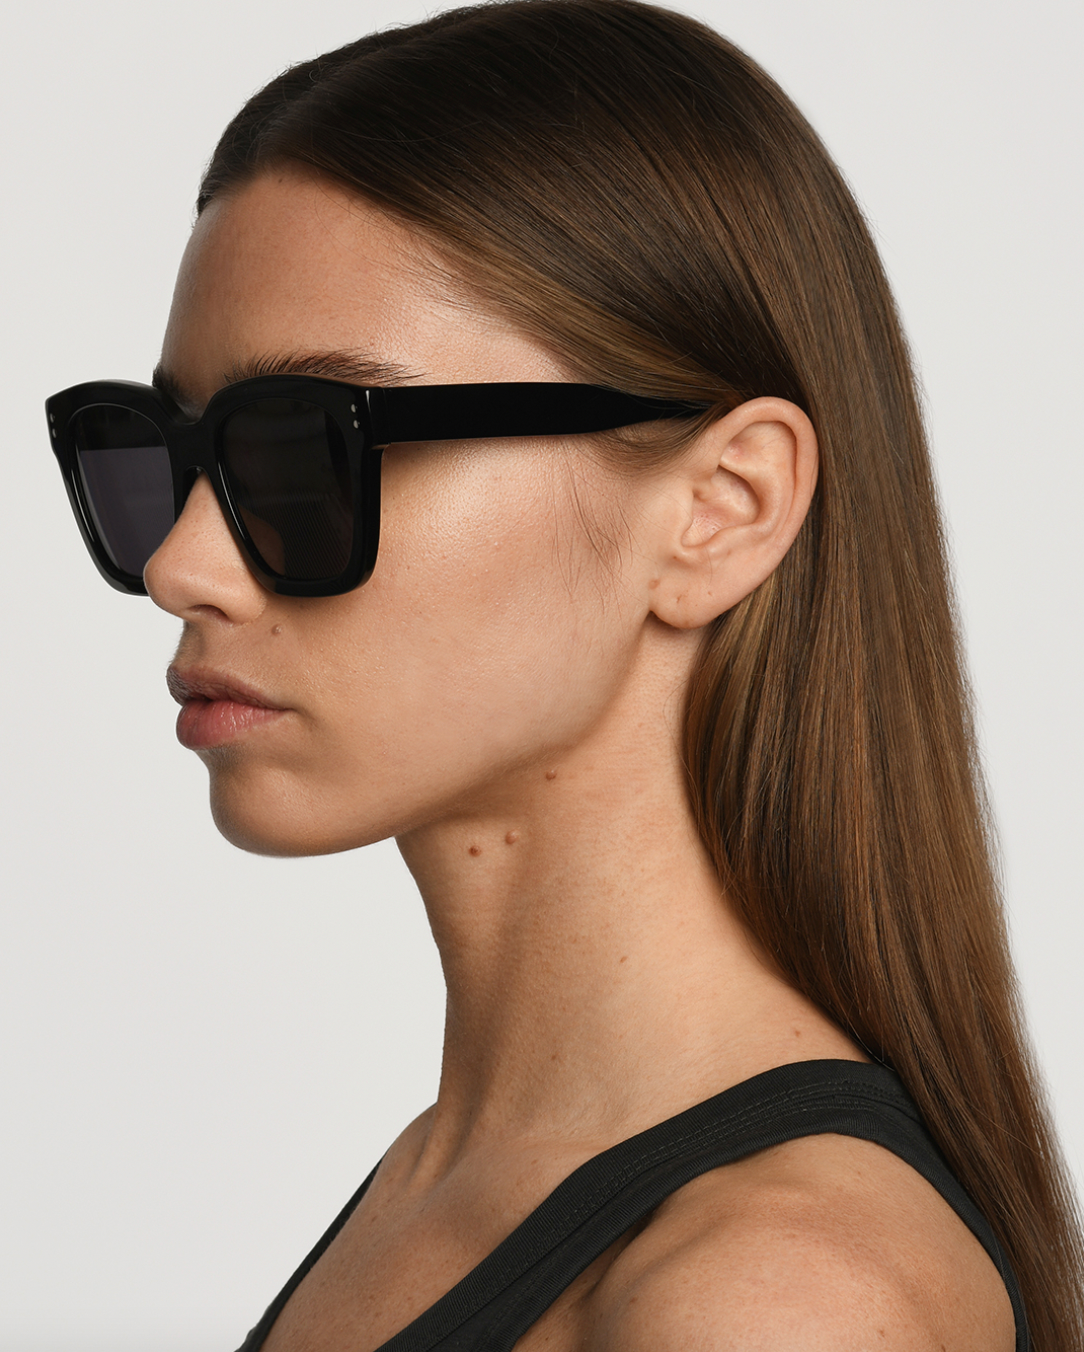 Get ready to turn heads with our Modena Black sunglasses by Corlin Eyewear. These sunglasses feature UV protection 400 and scratch-resistant CR39 lenses, perfect for any outdoor activity.